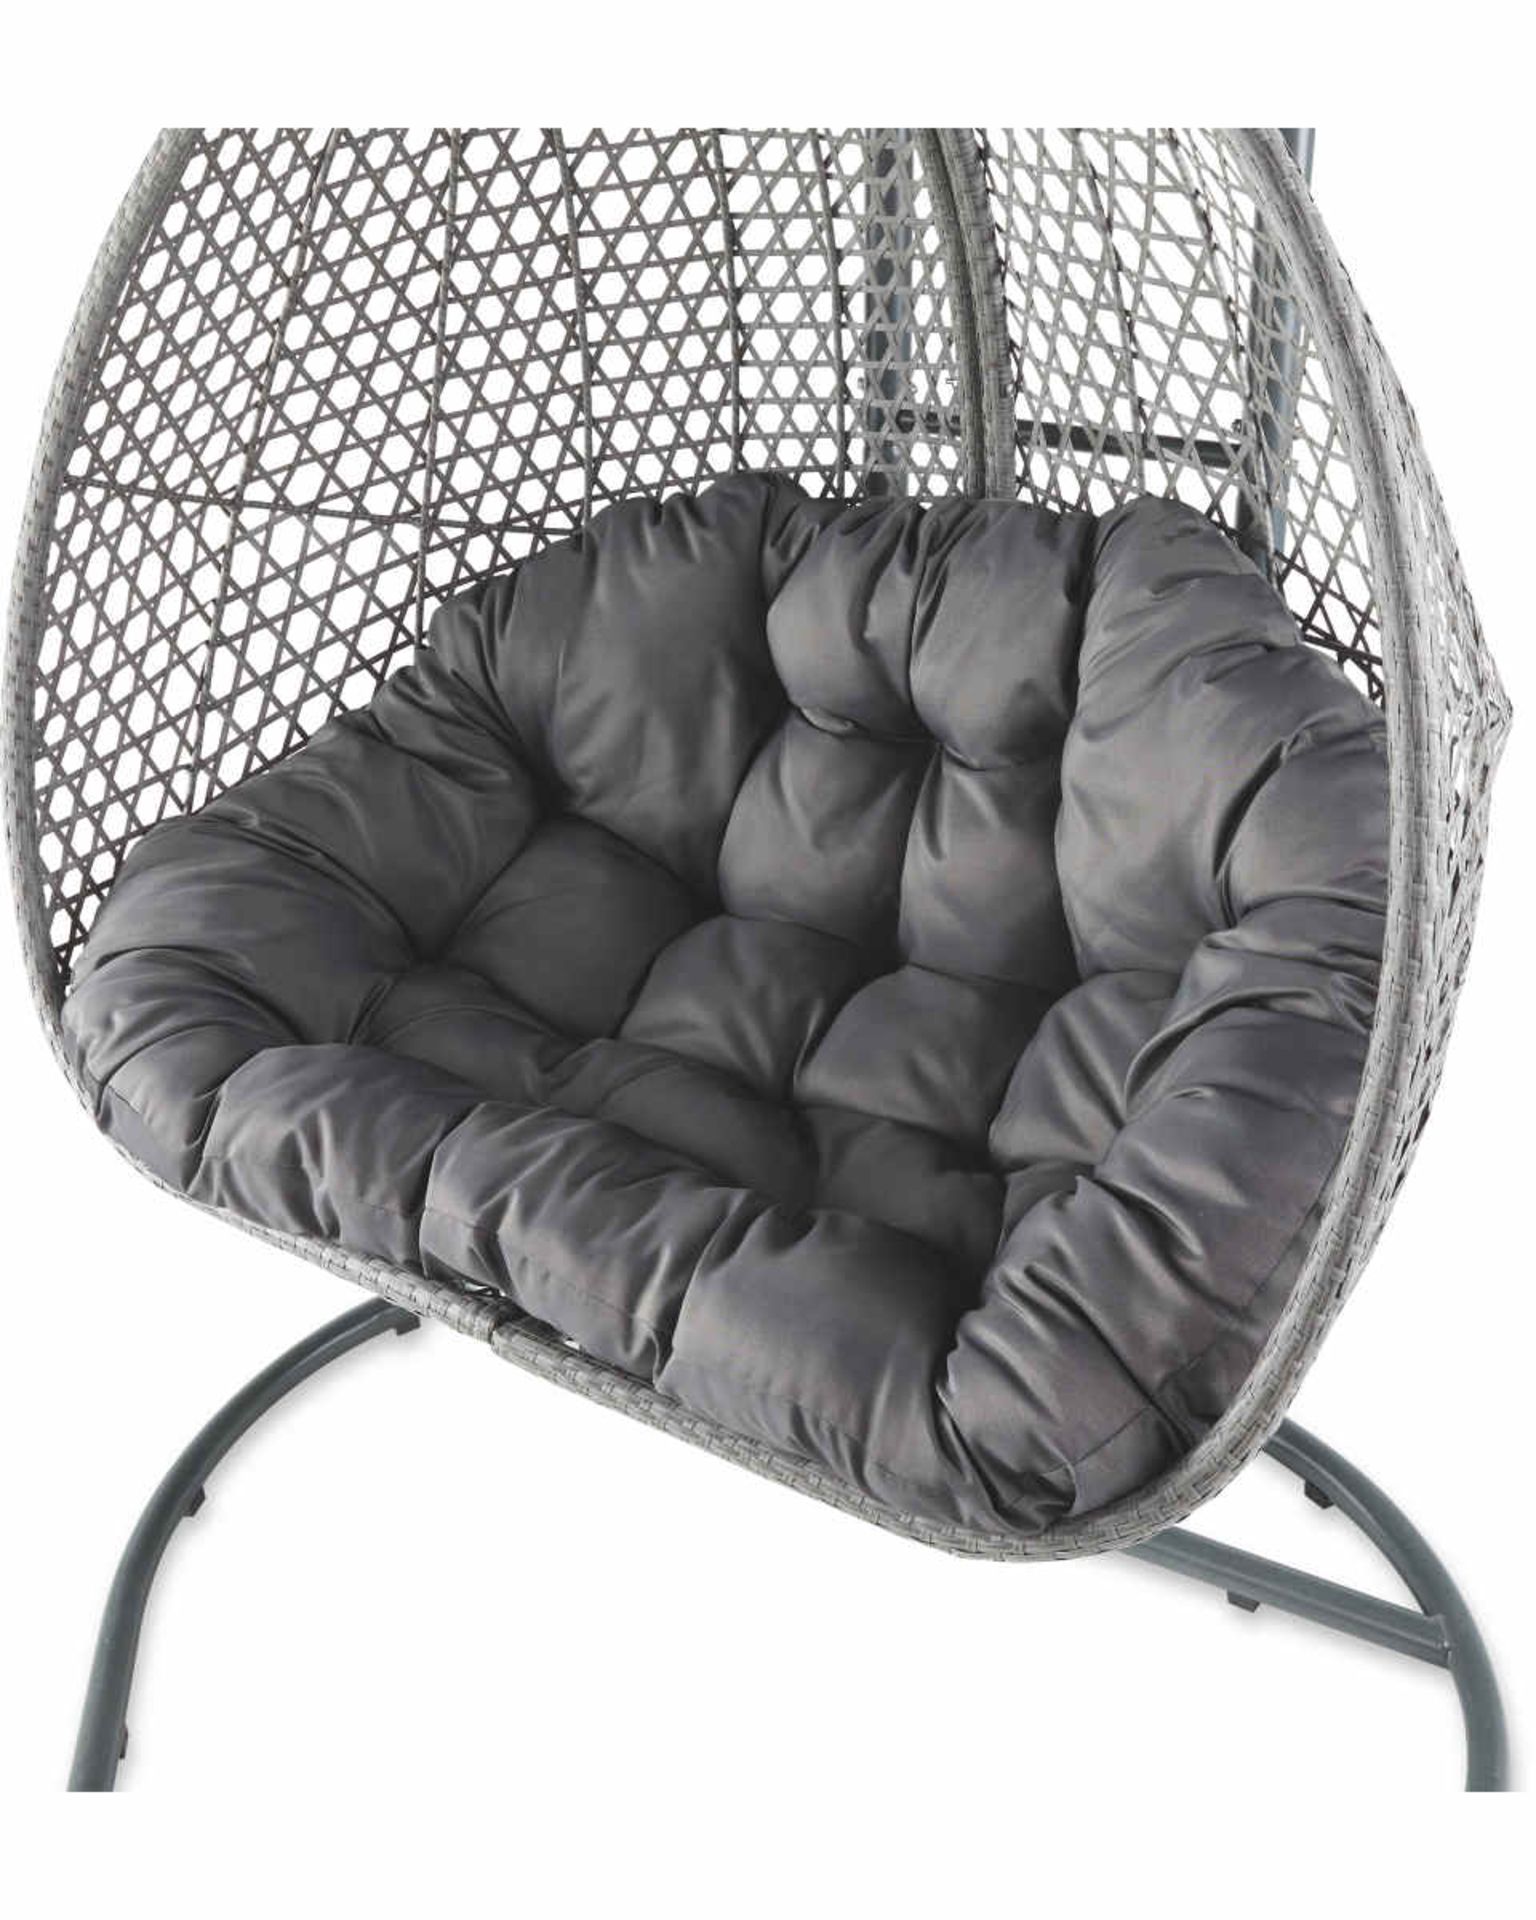 (2111926) Luxury Large Hanging Egg Chair - Image 2 of 2